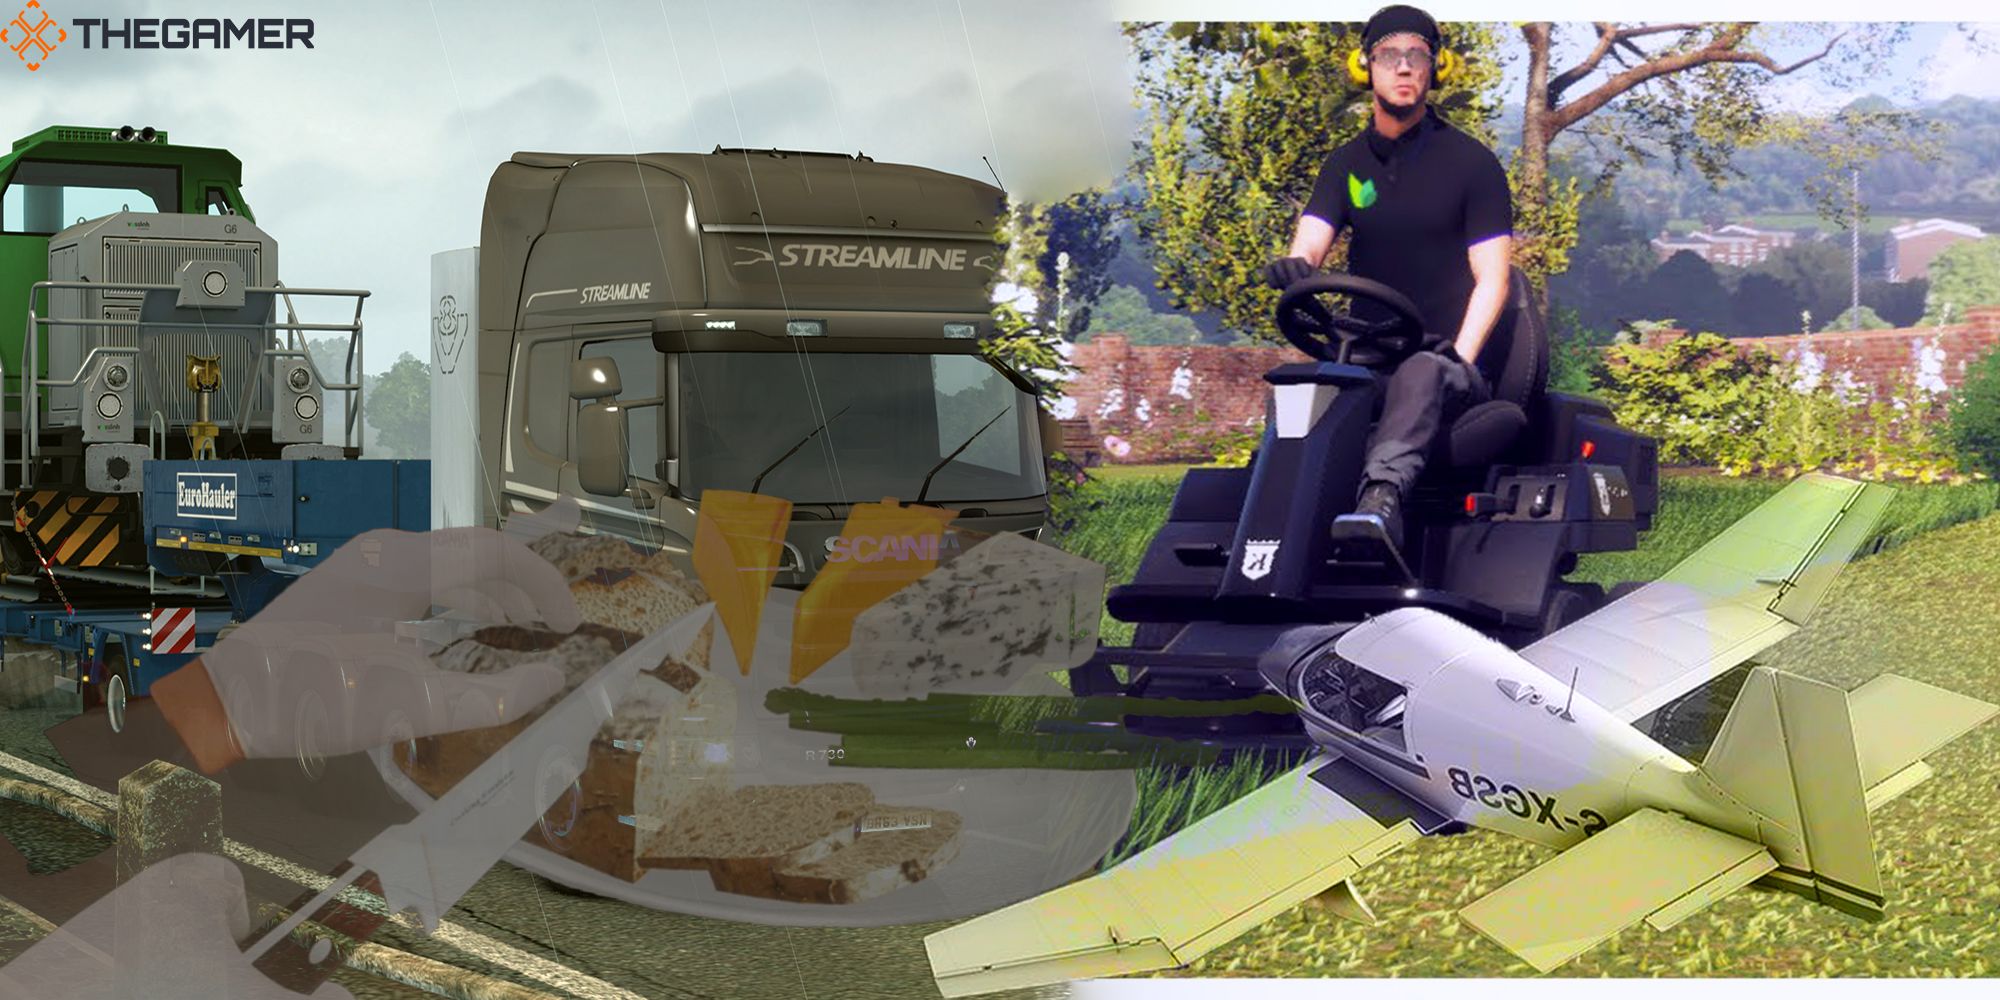 Euro trucks, lawn mowers, airplanes, and a charcuterie board collide in the Simulator Game Multiverse.